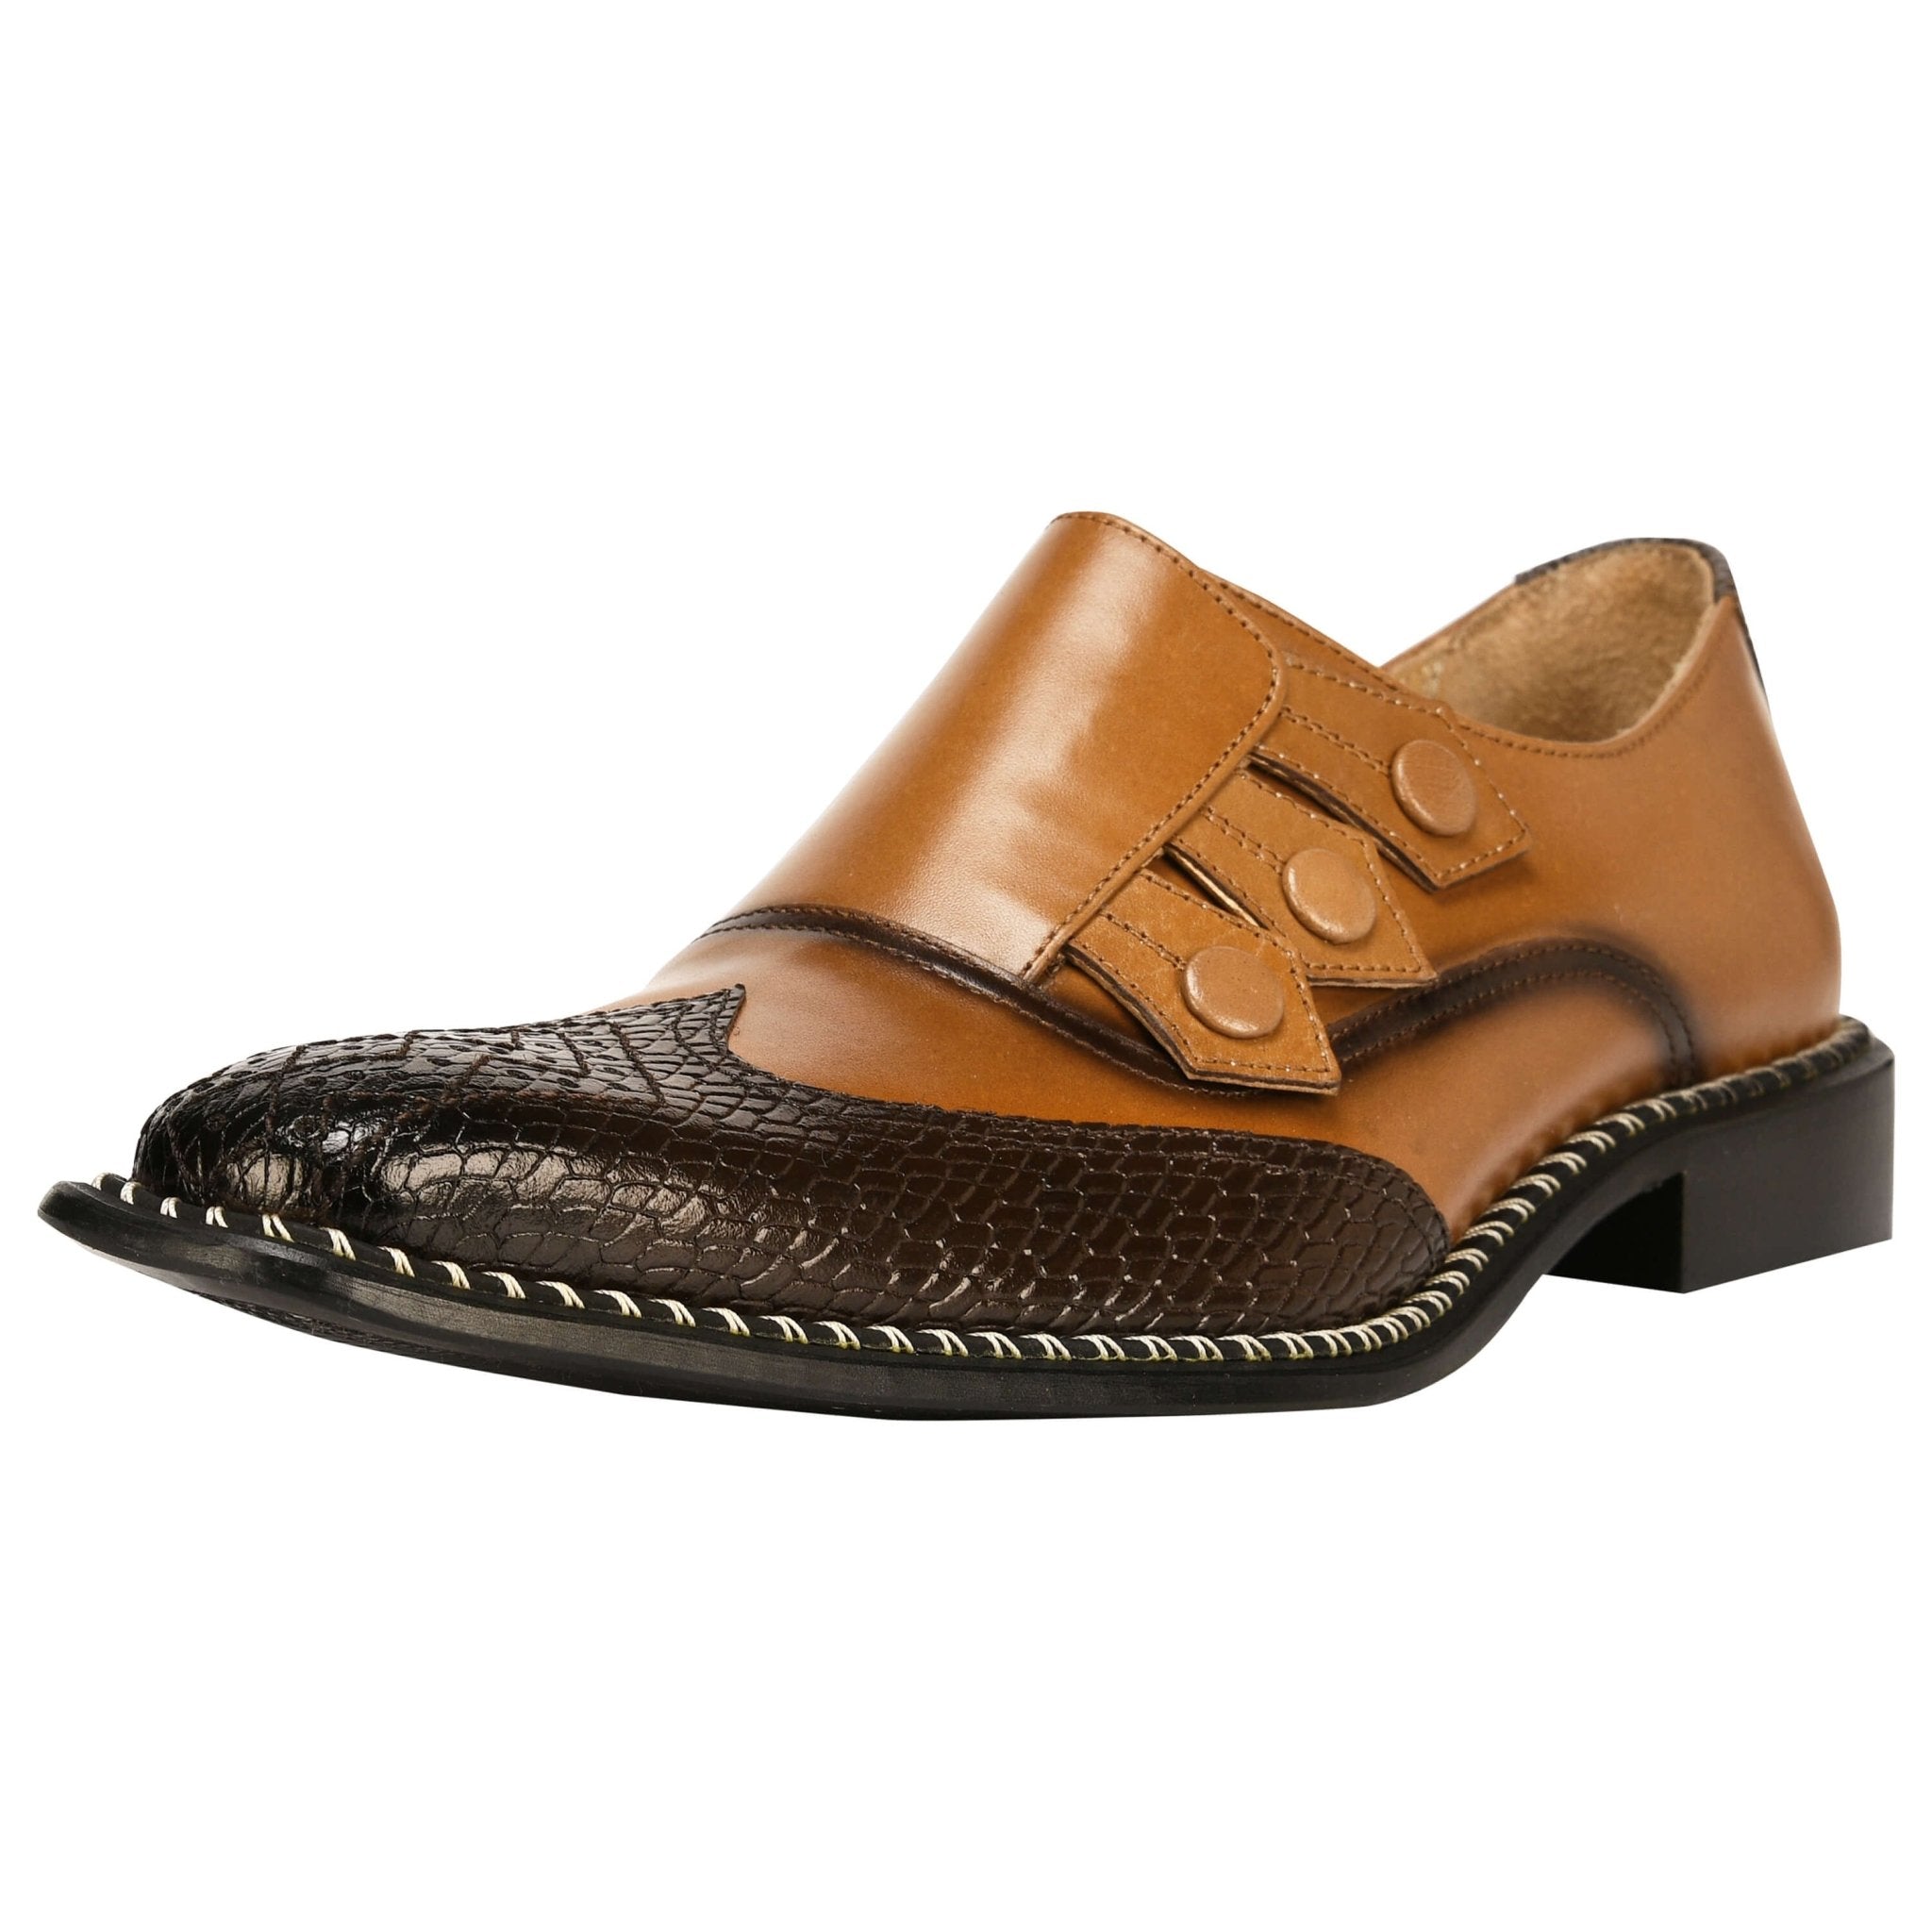 BOREDOM WITH OXFORD!! Rejuvenate Your Looks With Most Trendy And Stylish Monk Strap Shoes